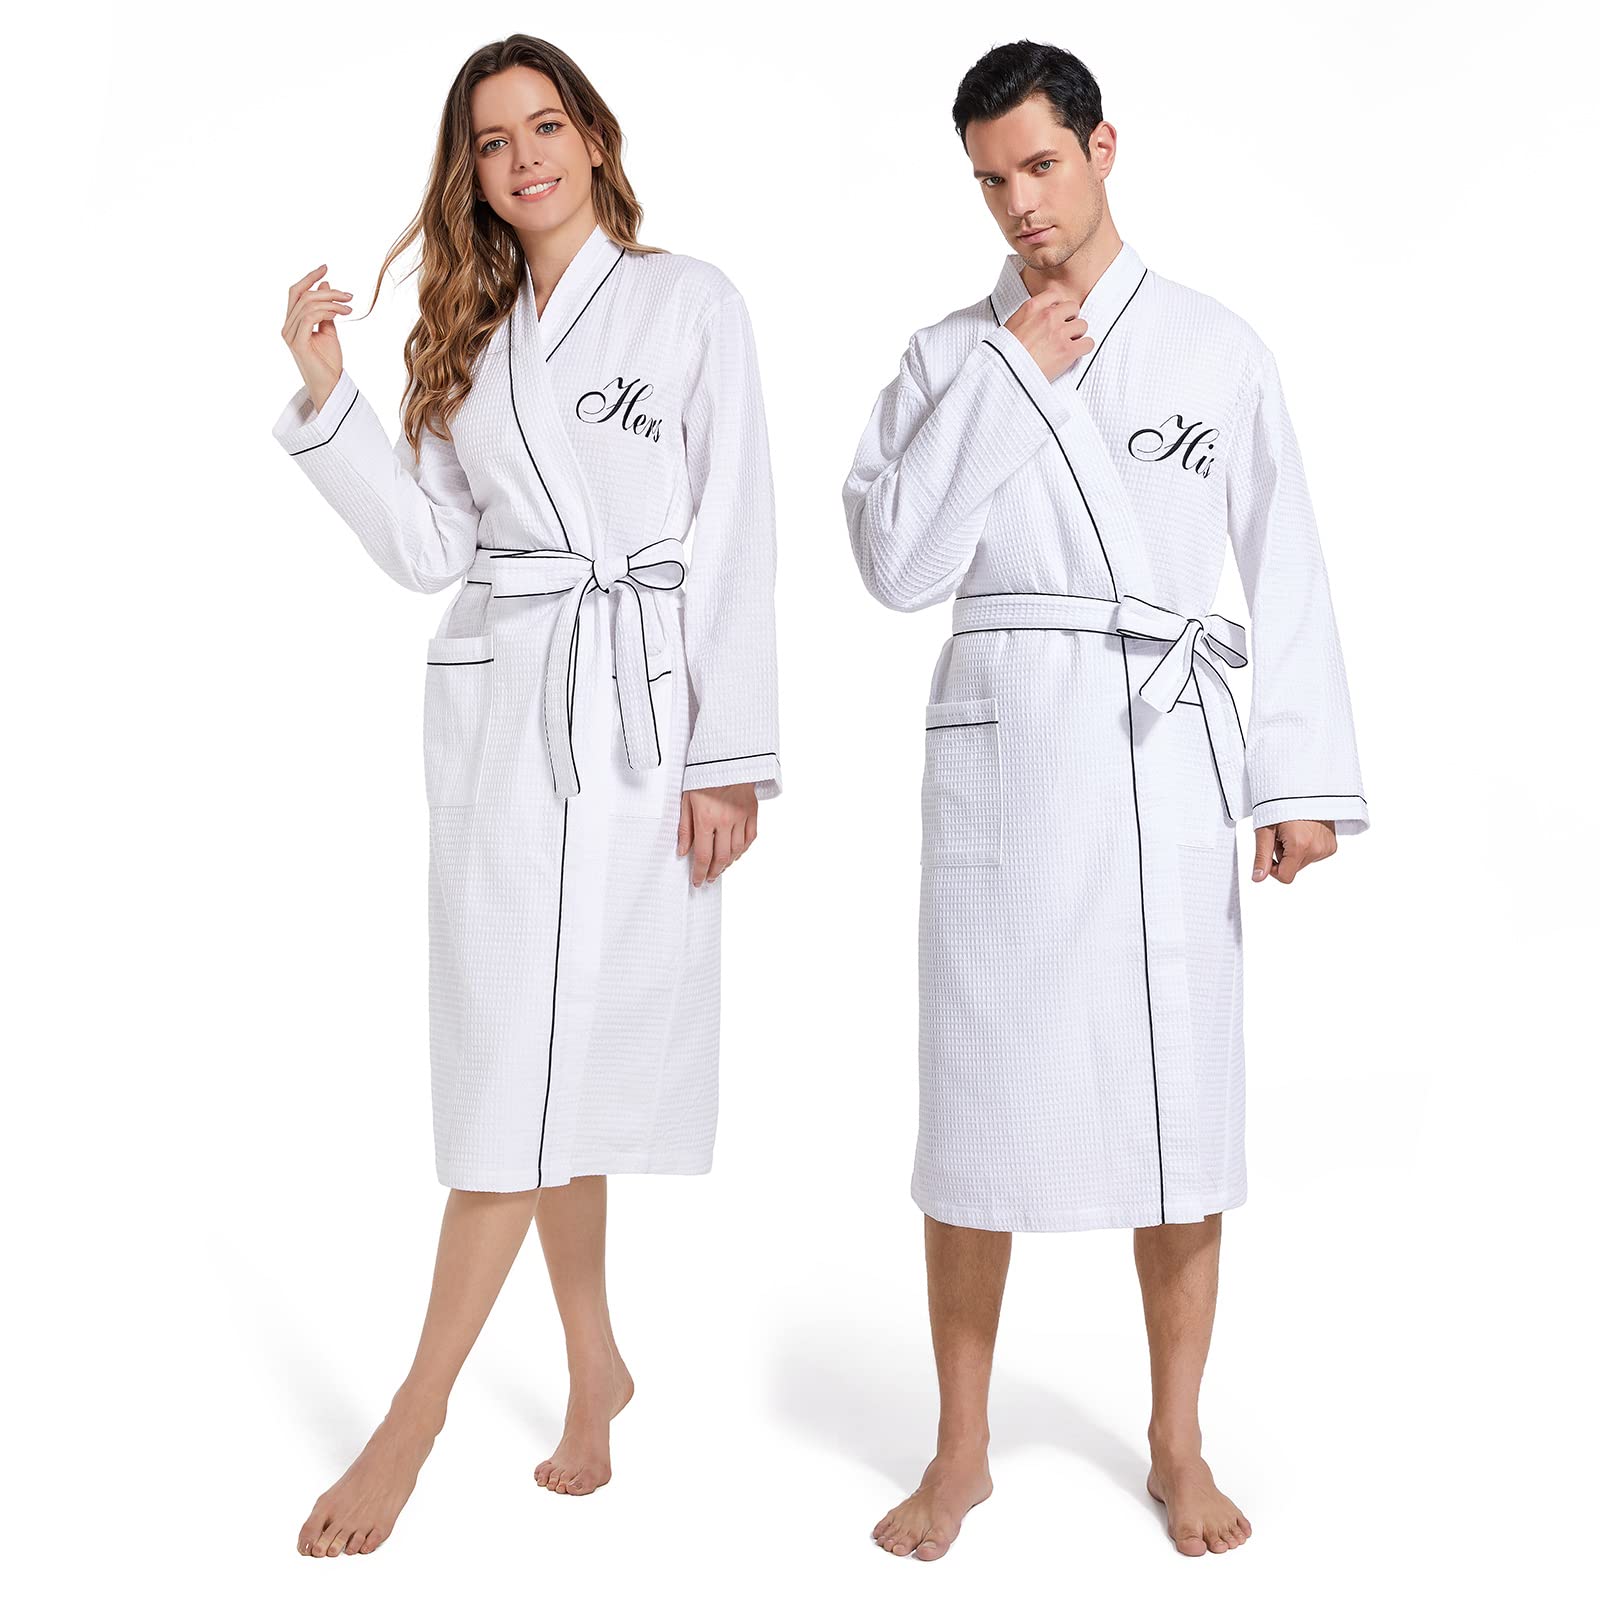 CONOMAX 2Pcs Couples Dressing Gown Waffle Robe Sets Cotton Bathrobe for Hotel Spa Party Kimono robe with His and Hers Embroidery